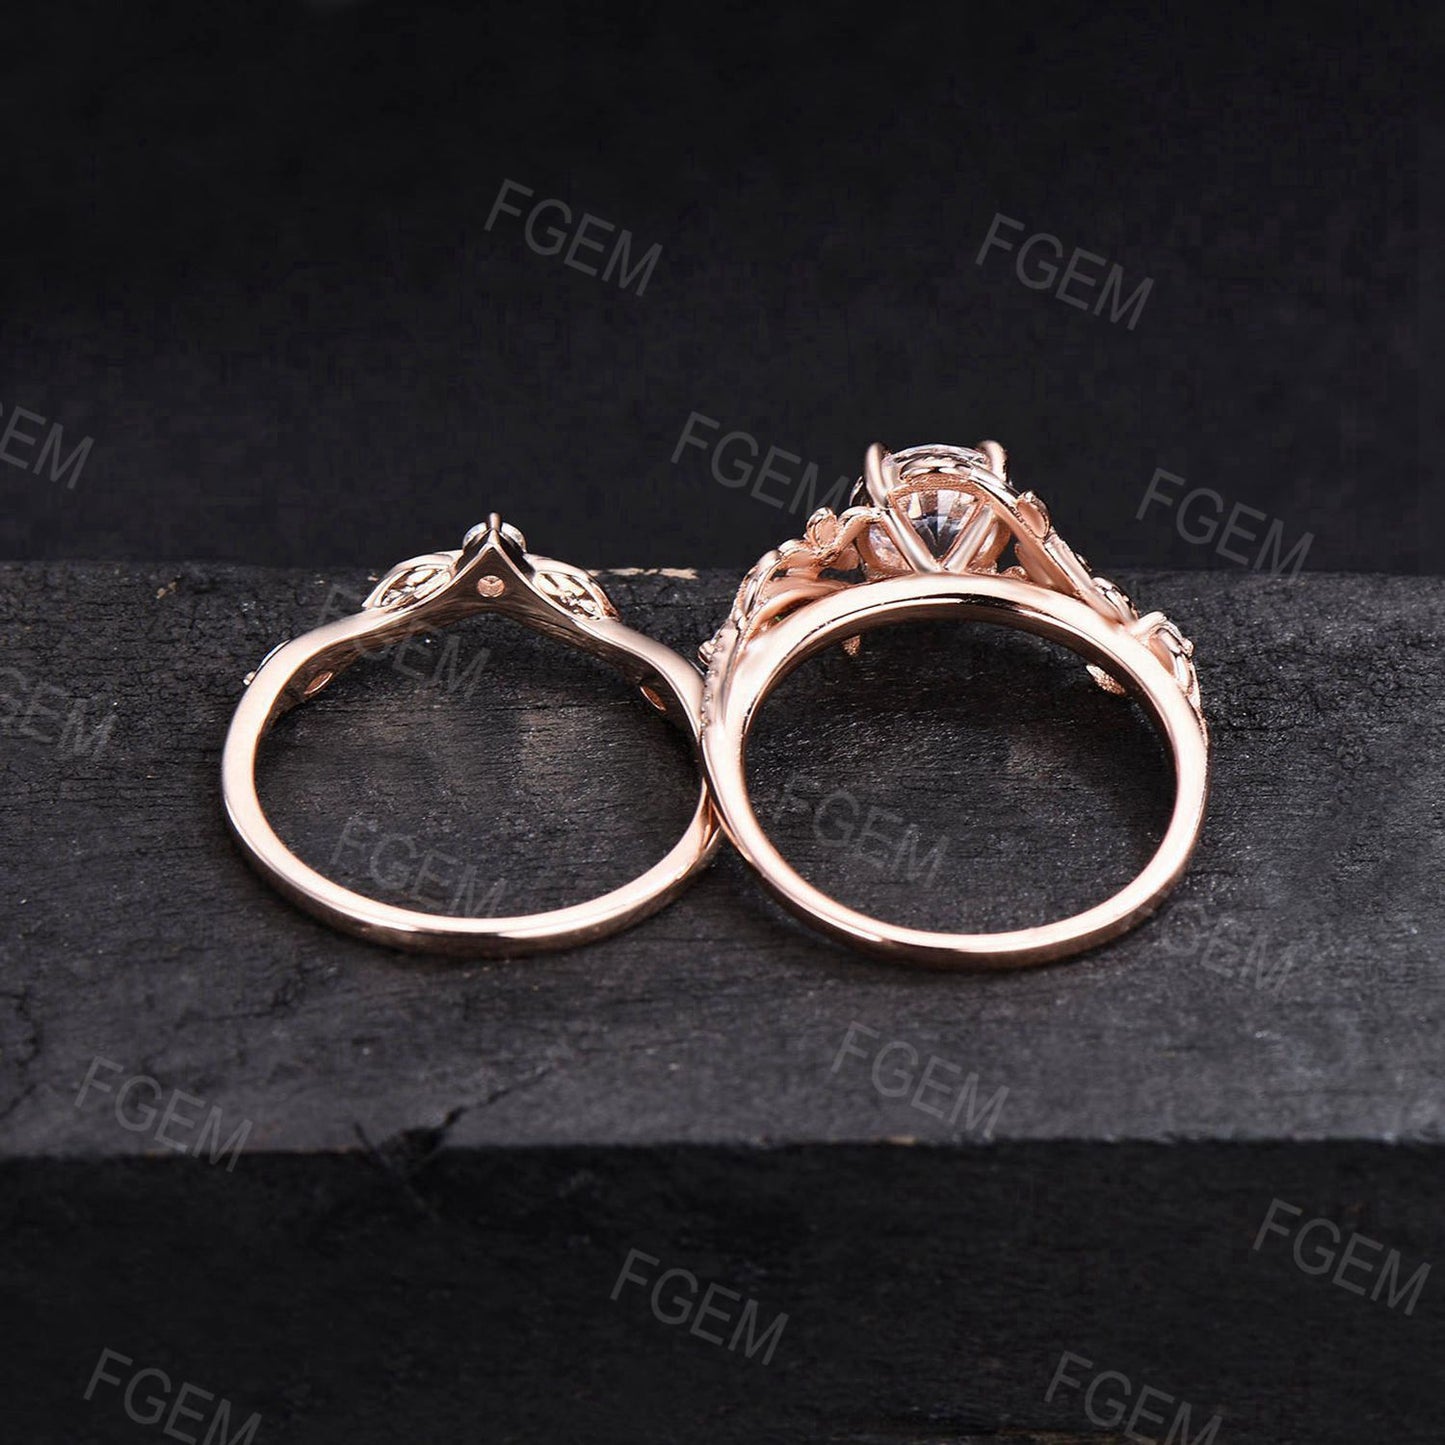 Unique Branch Leaf Moissanite Engagement Ring Set Rose Gold Bypass Ring Round Moissanite Diamond Bridal Set Floral Pave Ring Proposal Gift